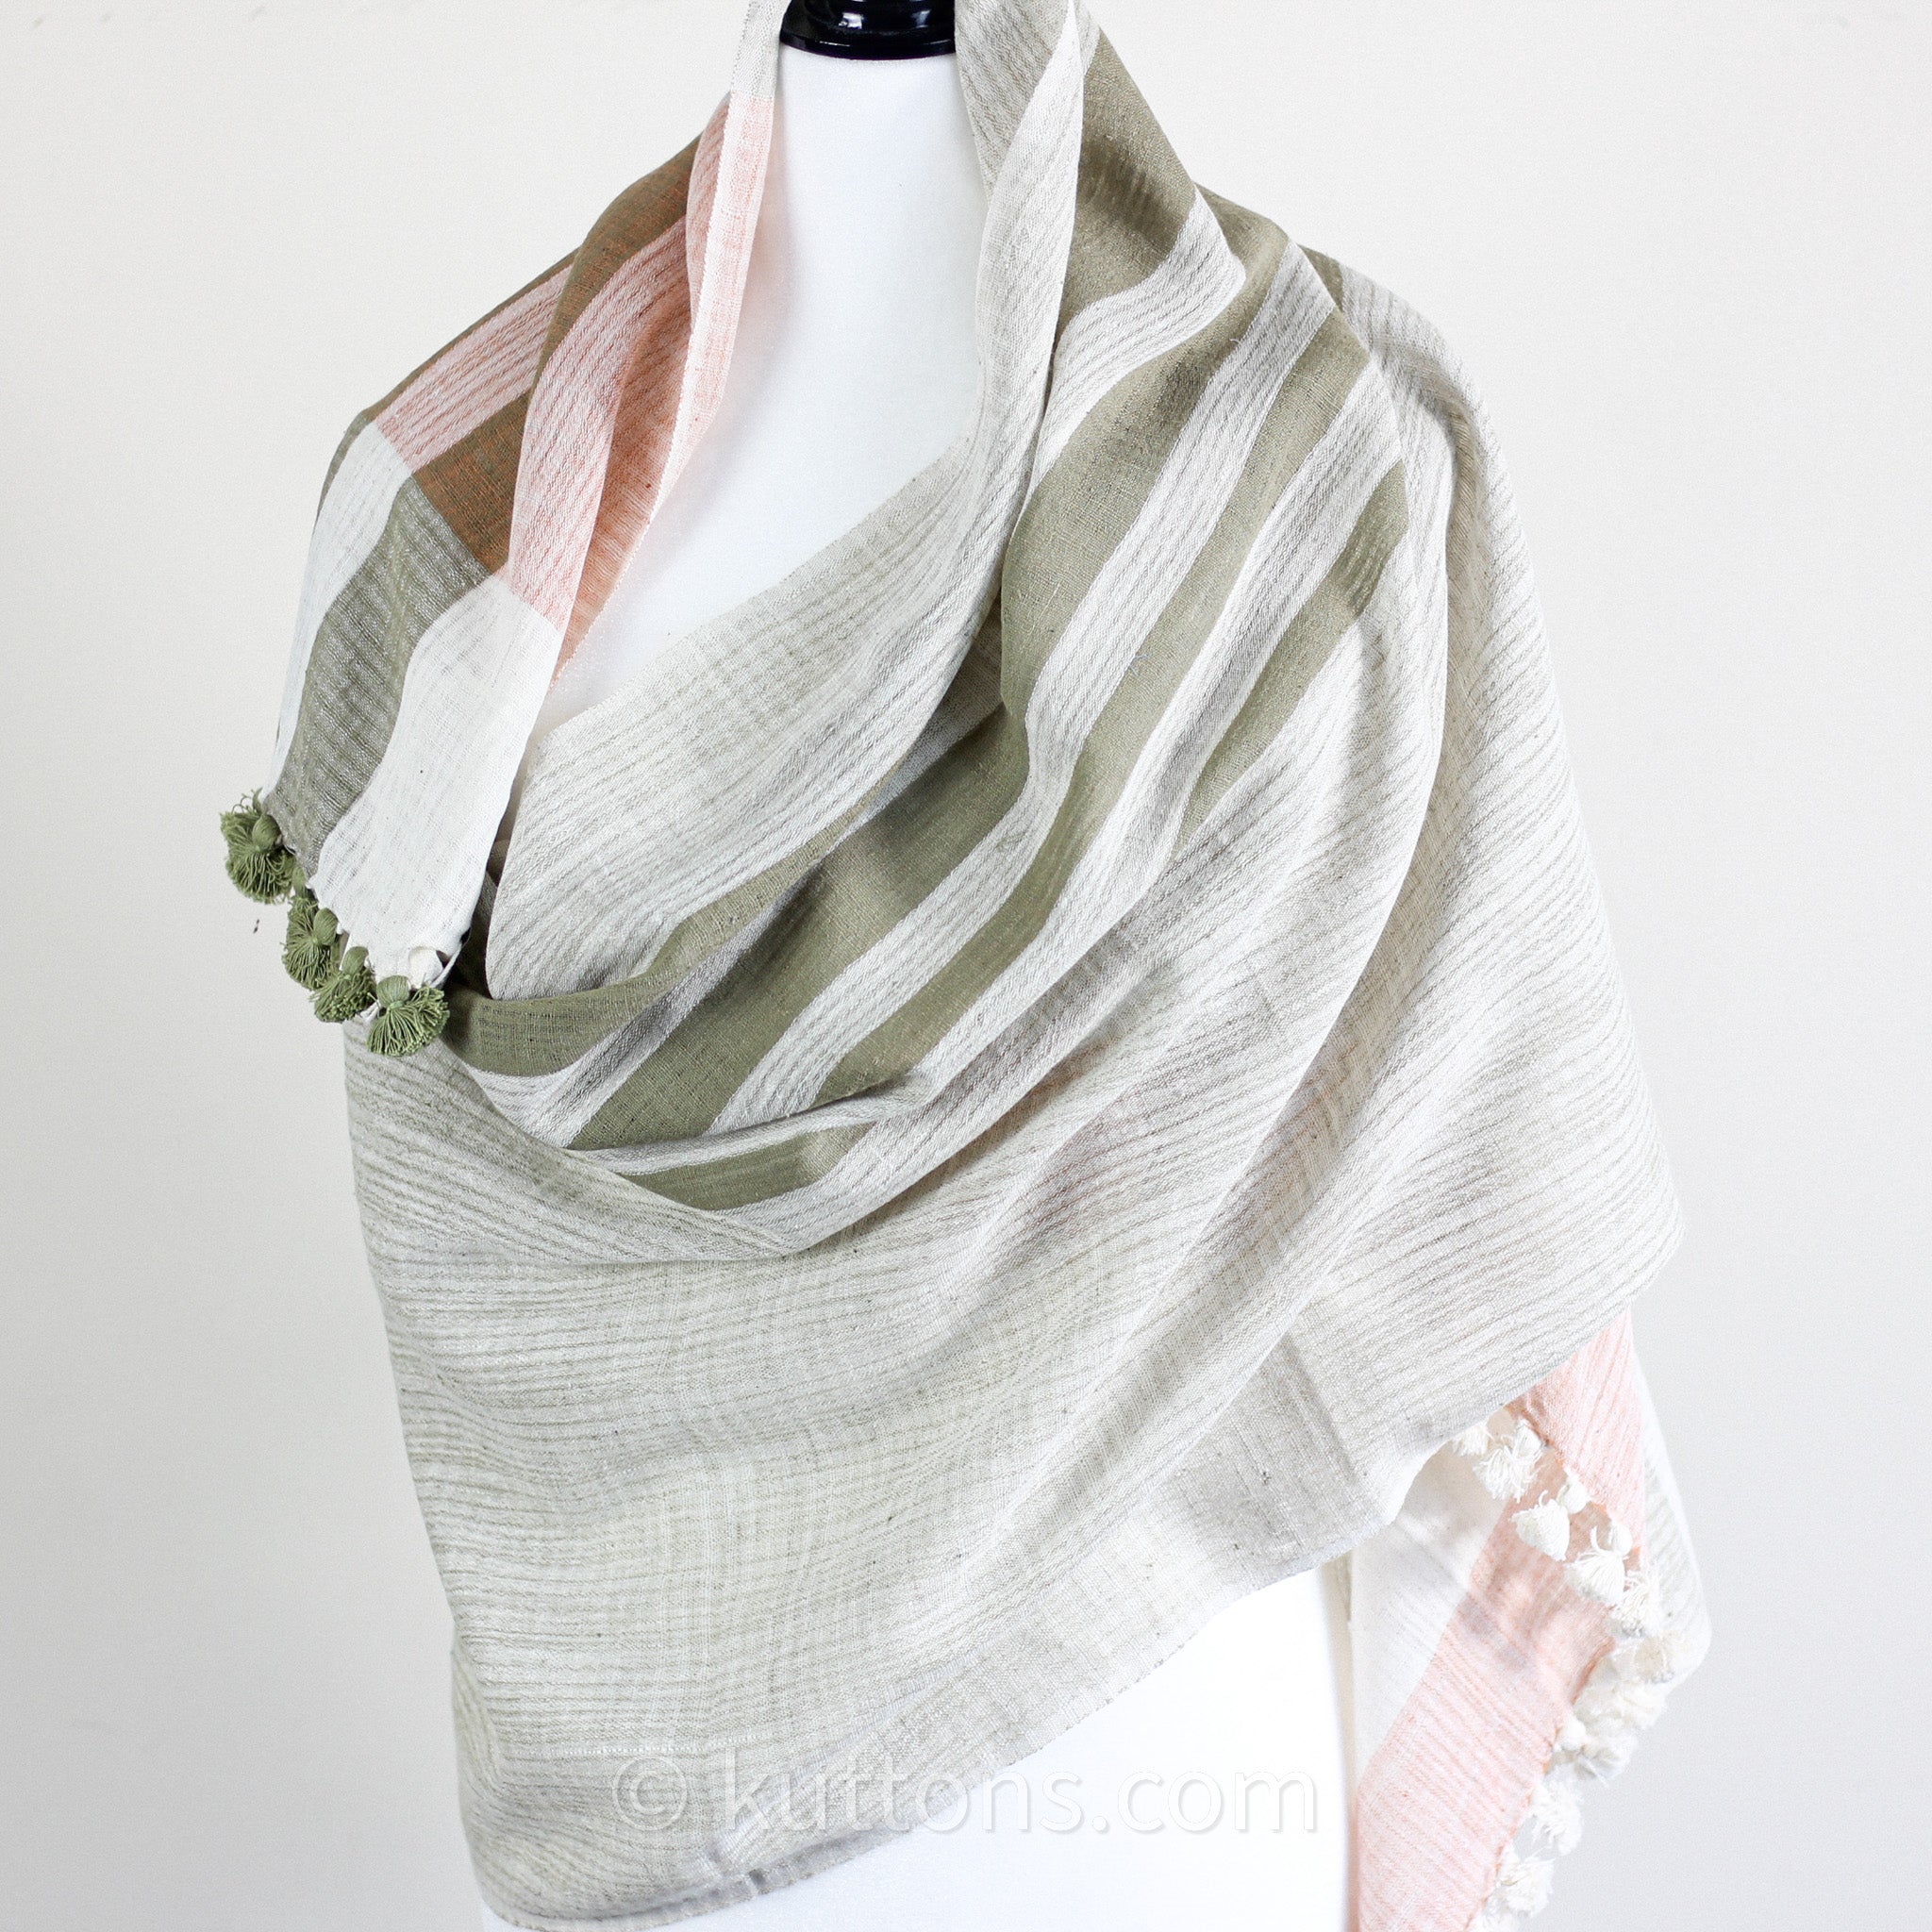 Naturally Dyed Organic Cotton Scarf Handspun  Handwoven Stole  White-Pink – Kuttons